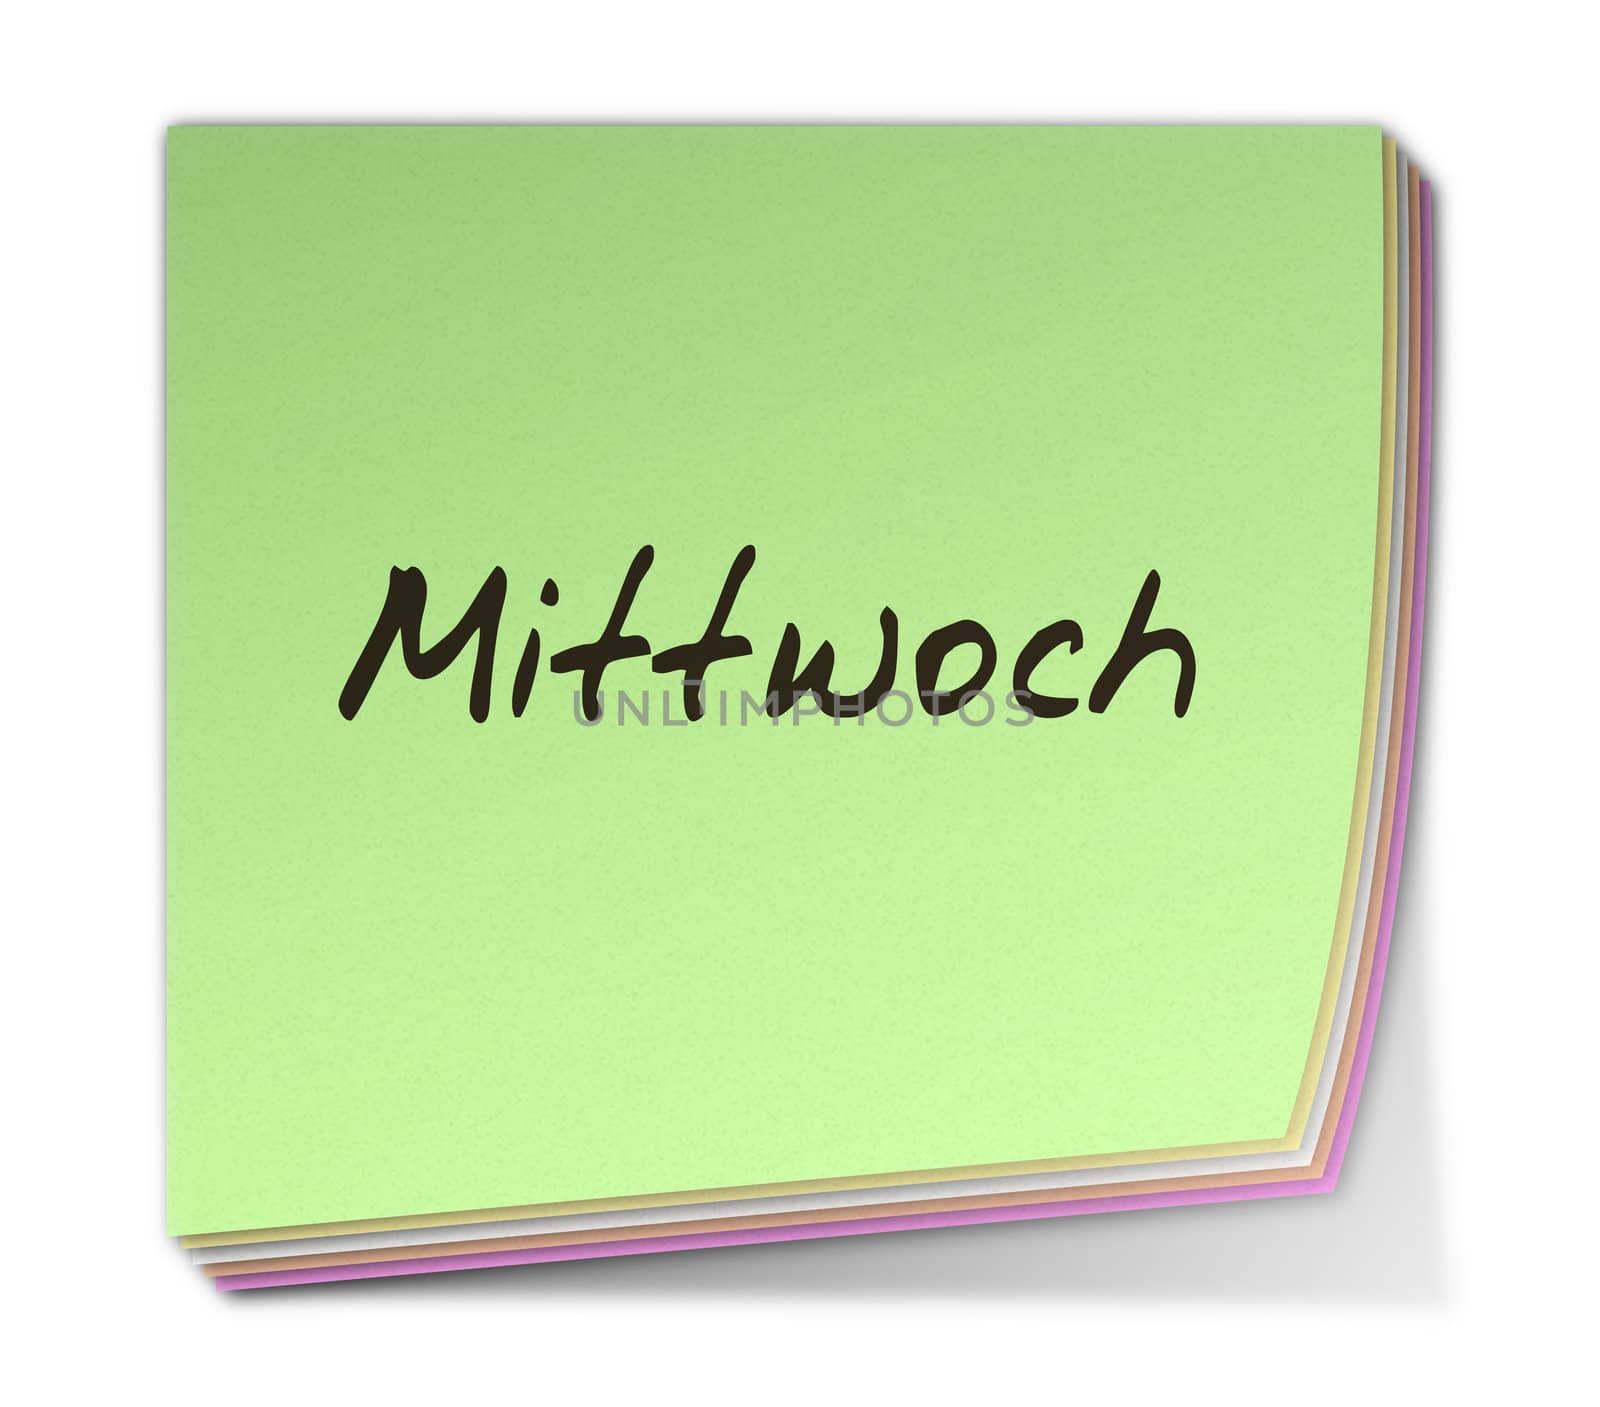 Color Post-it Notes With Handwritten Weekday in German